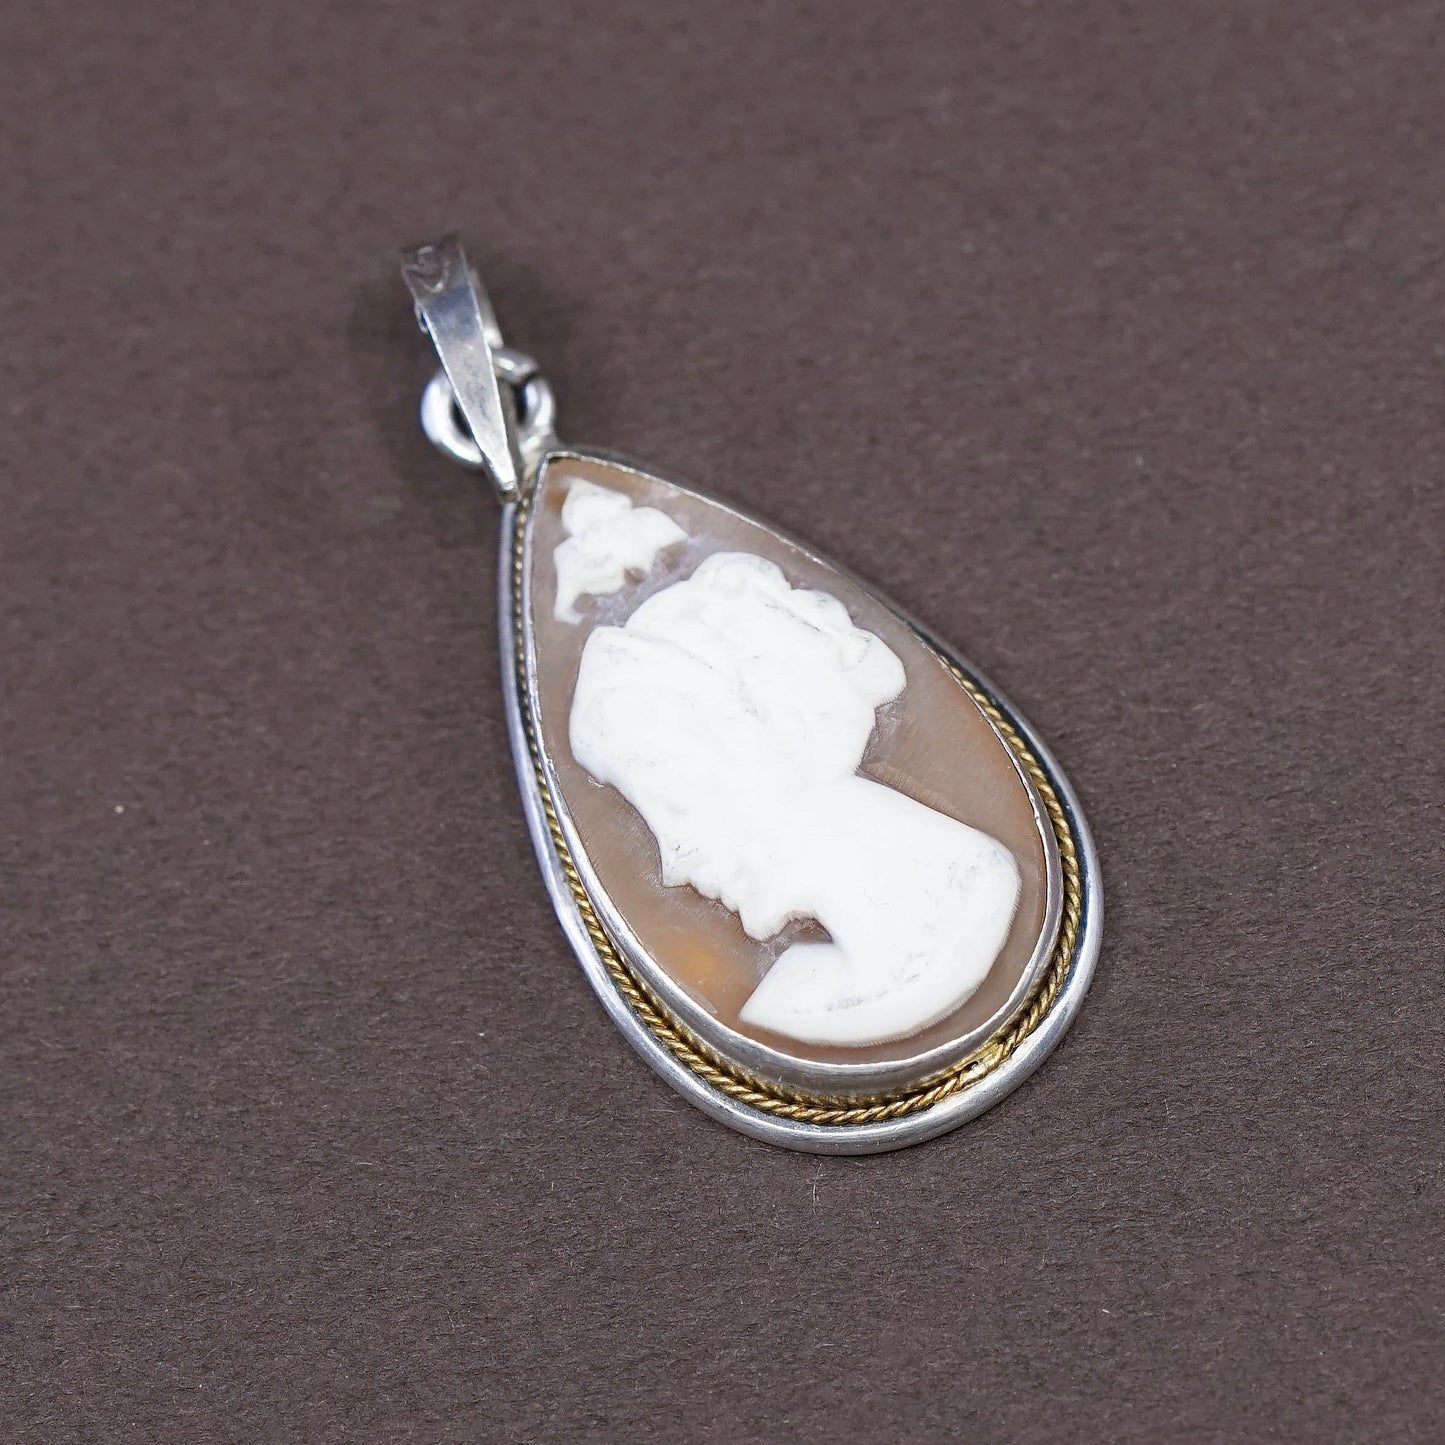 Vintage Sterling 925 silver handmade pendant with agate cameo girl